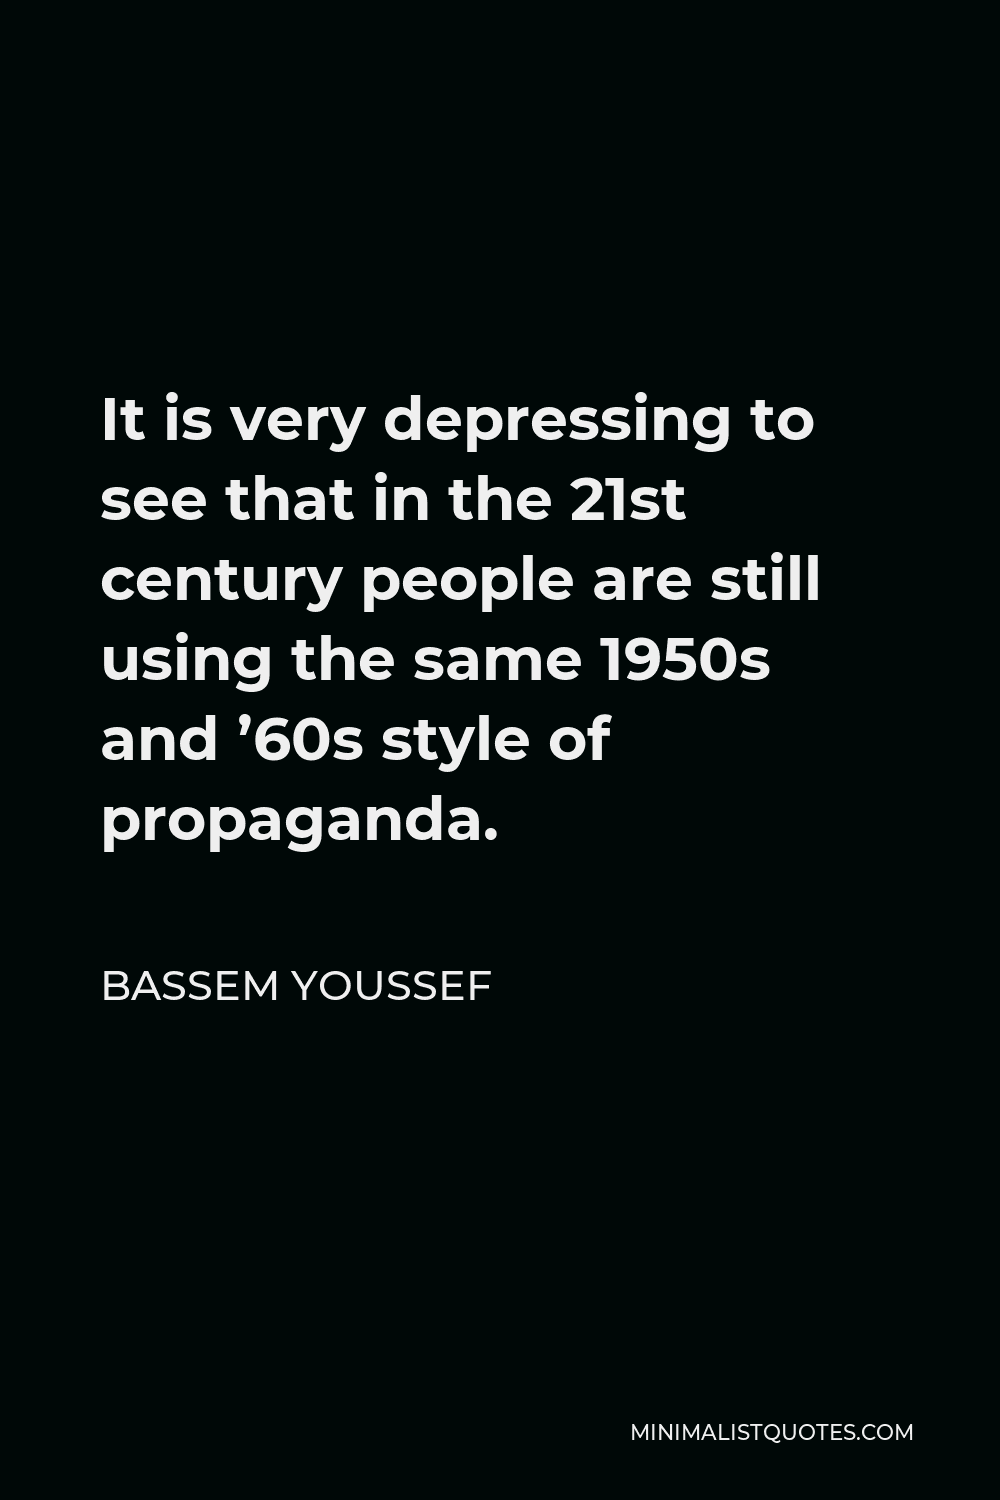 Bassem Youssef Quote - It is very depressing to see that in the 21st century people are still using the same 1950s and ’60s style of propaganda.